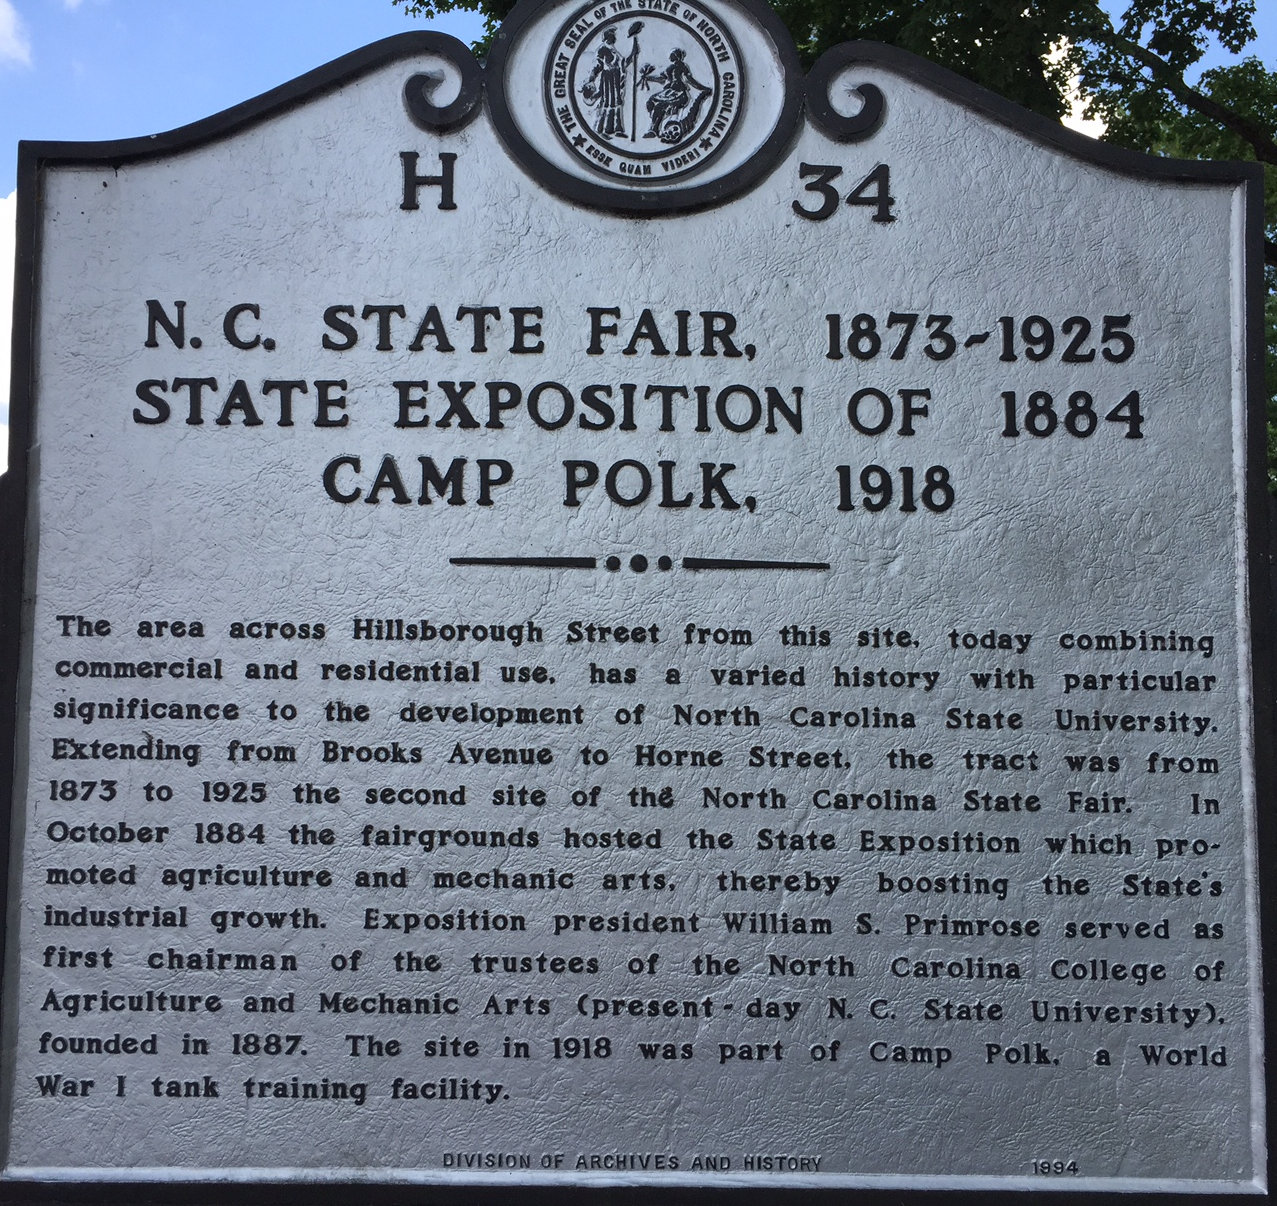 Historic Marker for the NC State Fair 1873-1925, State Exposition of 1884, and Camp Polk 1918